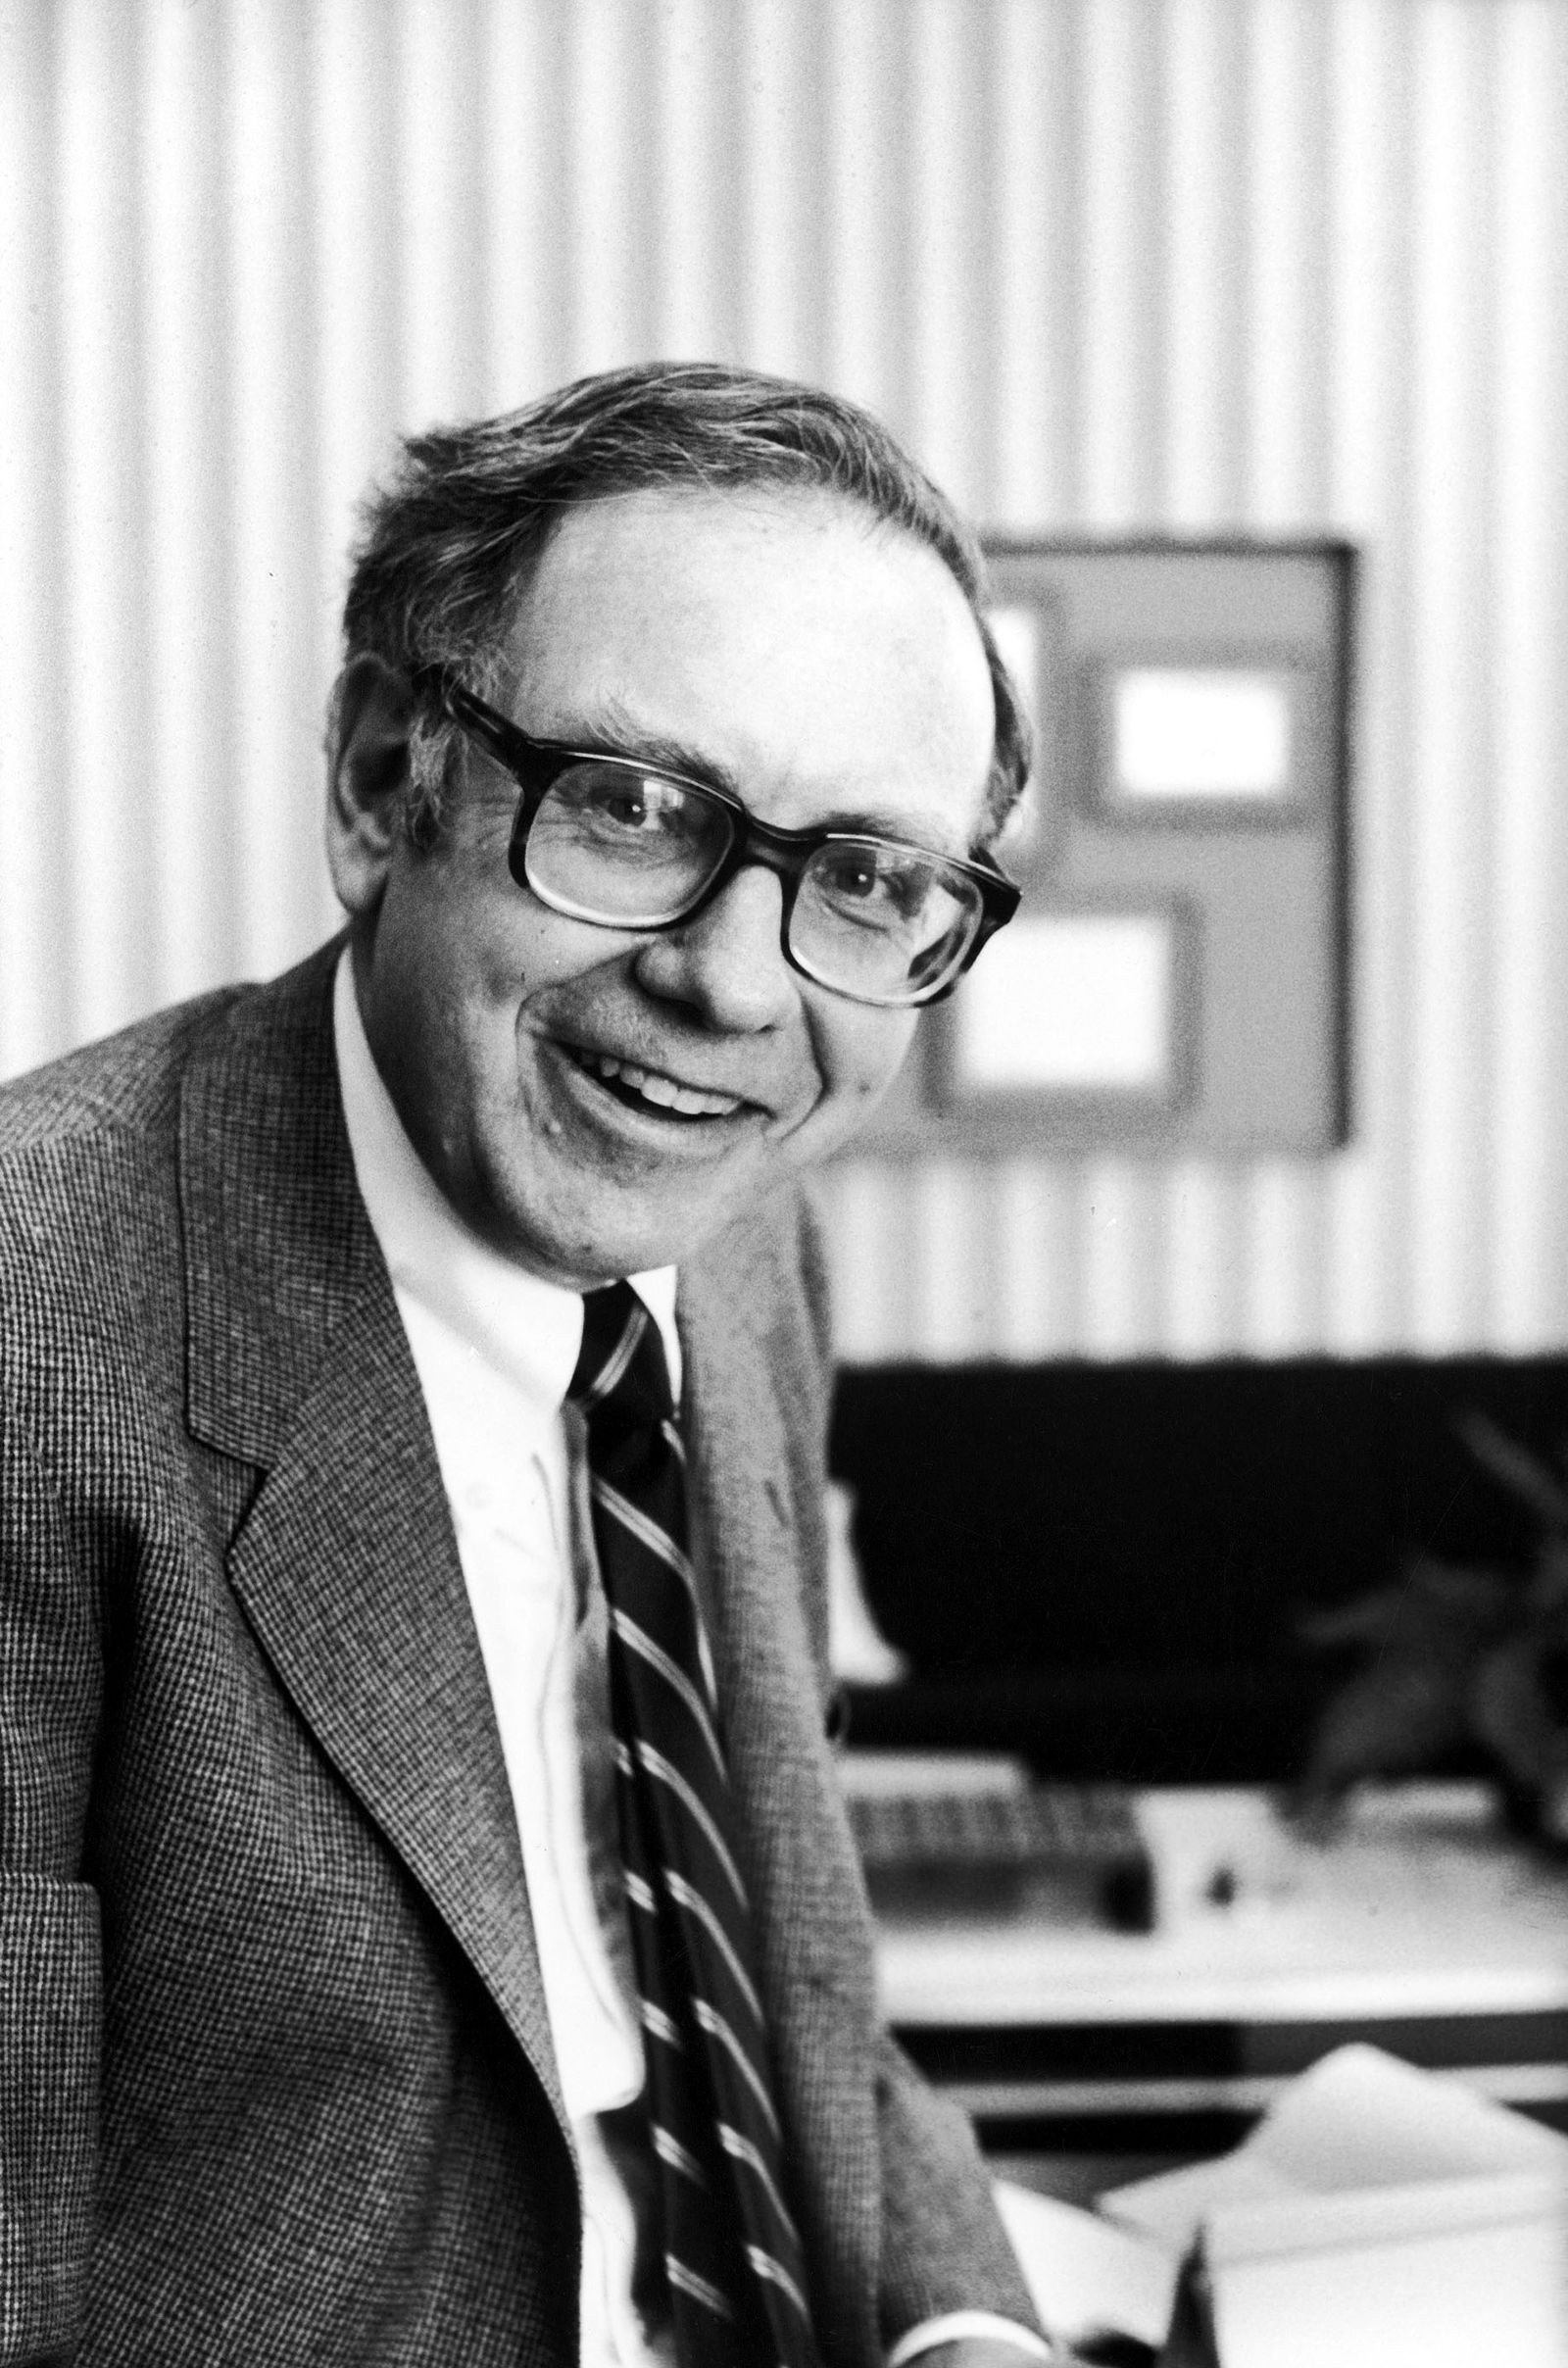 Buffett poses for a photo in 1980.